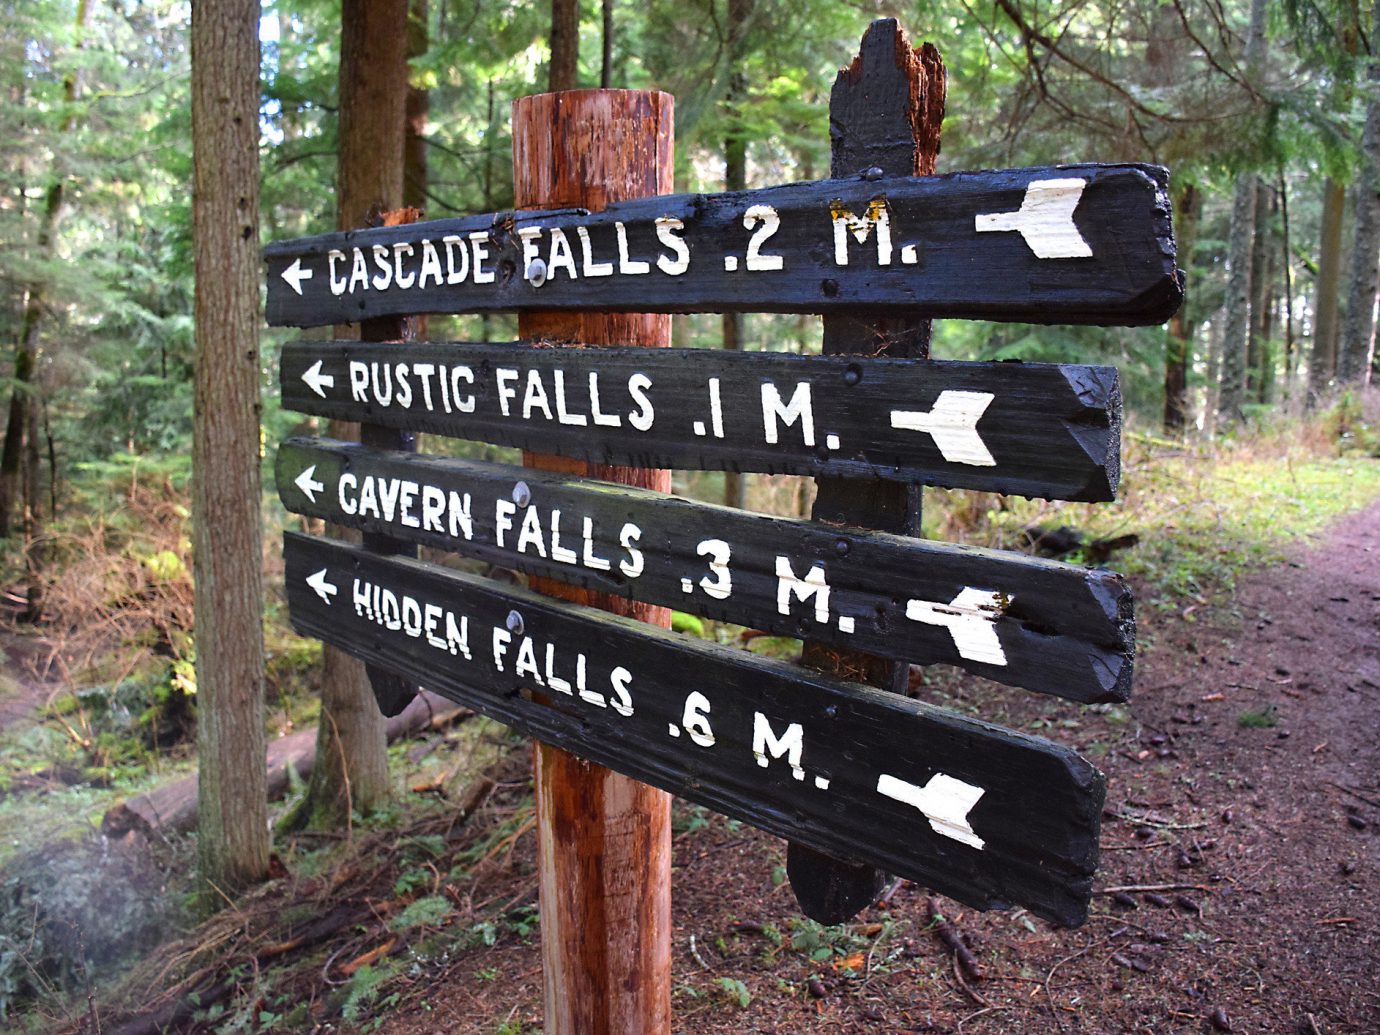 Trip Ideas tree outdoor grass trail wilderness wood wooden sign park Forest signage traffic sign wooded